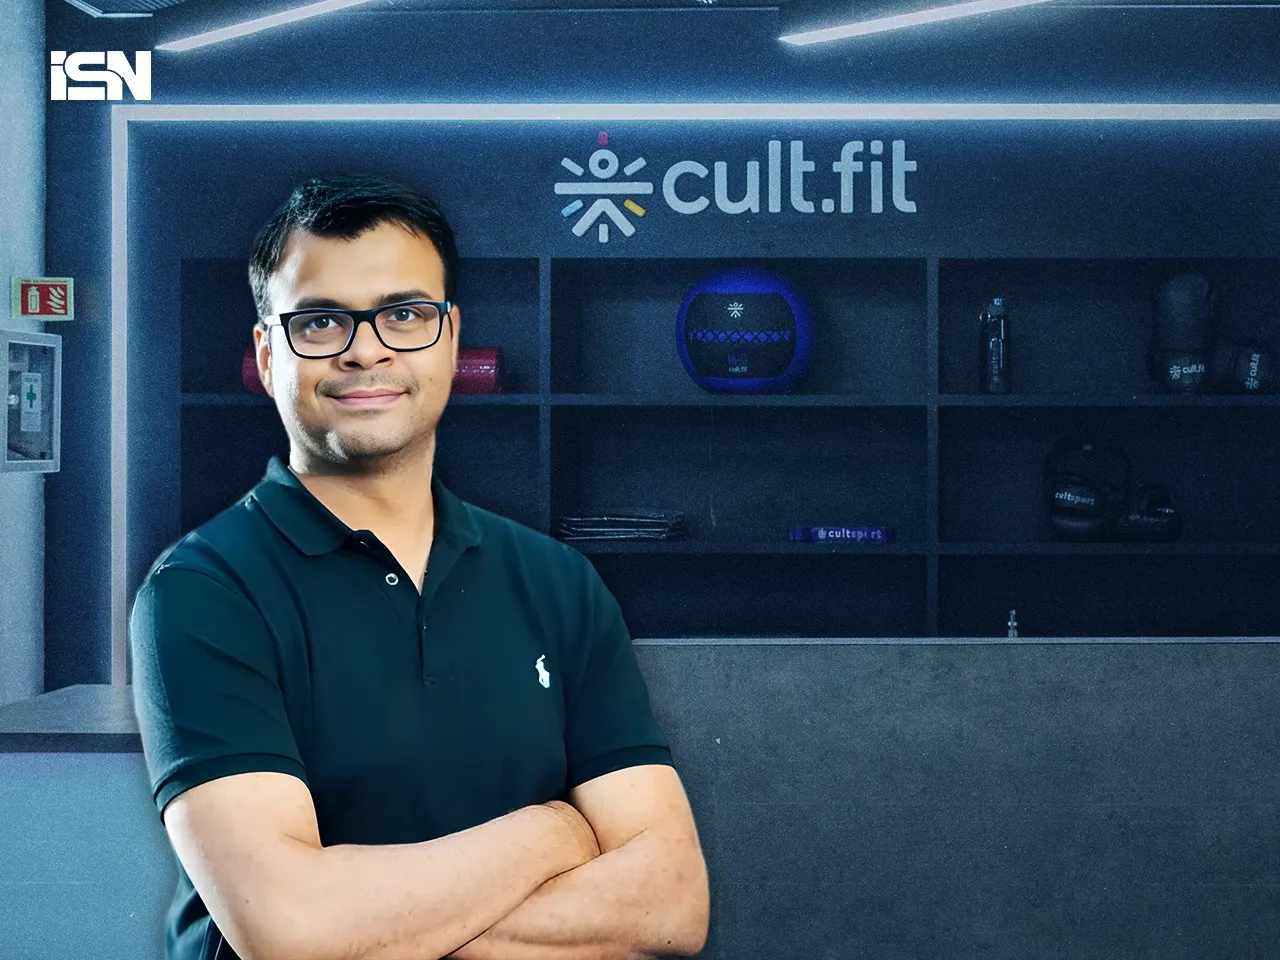 Zomato-backed Cultfit appoints Naresh Krishnaswamy as its new CEO; Bansal becomes chairman